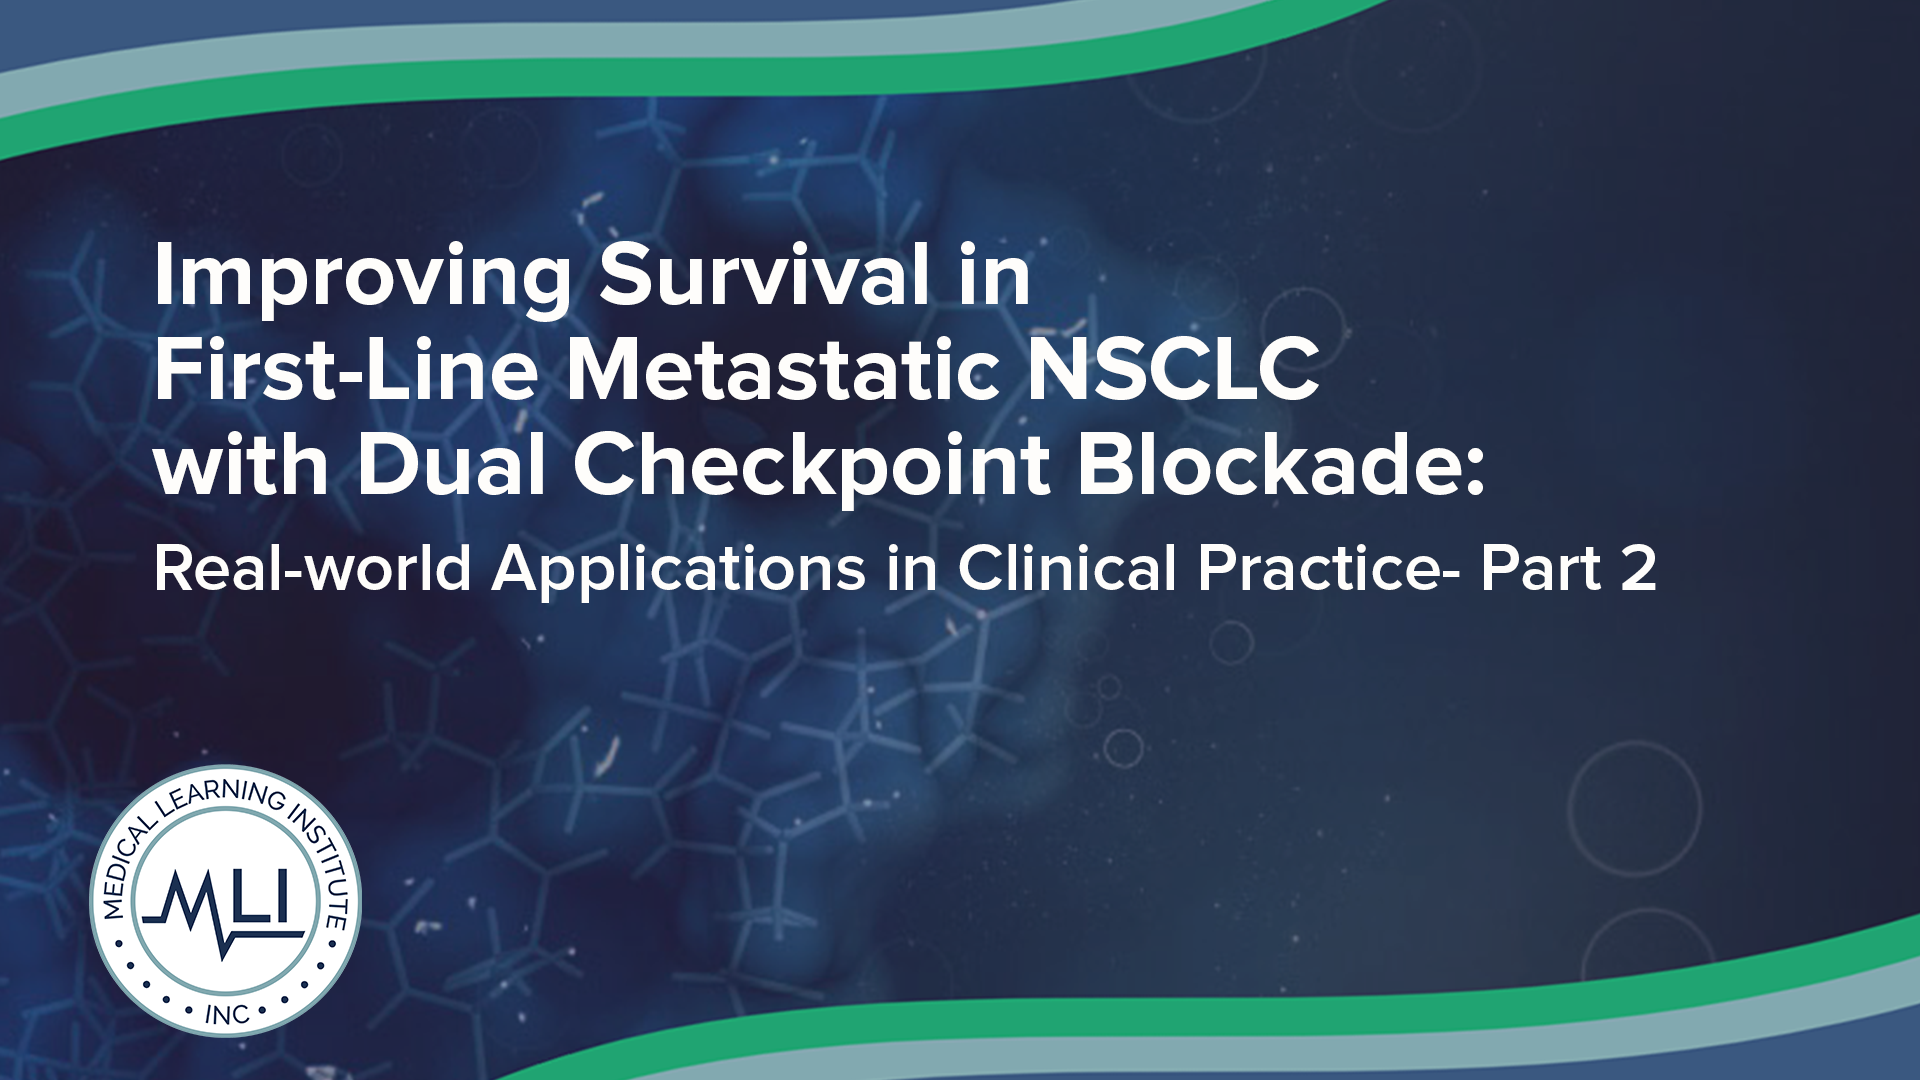 Improving Survival in First-Line Metastatic NSCLC with Dual Checkpoint Blockade: Real-world Applications in Clinical Practice